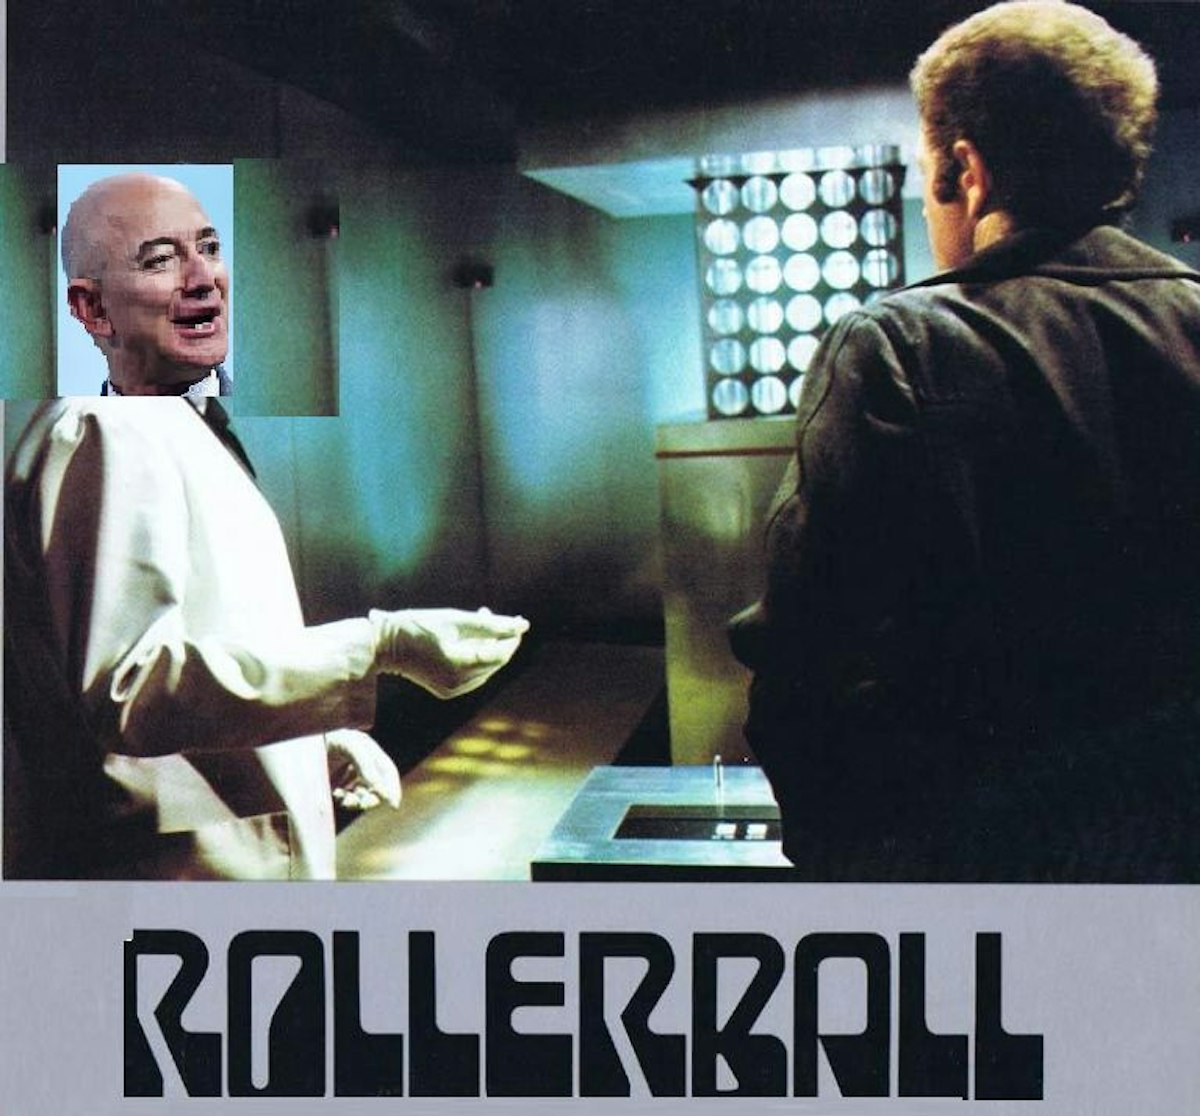 featured image - The Rollerball Cryptocurrency Hypothesis